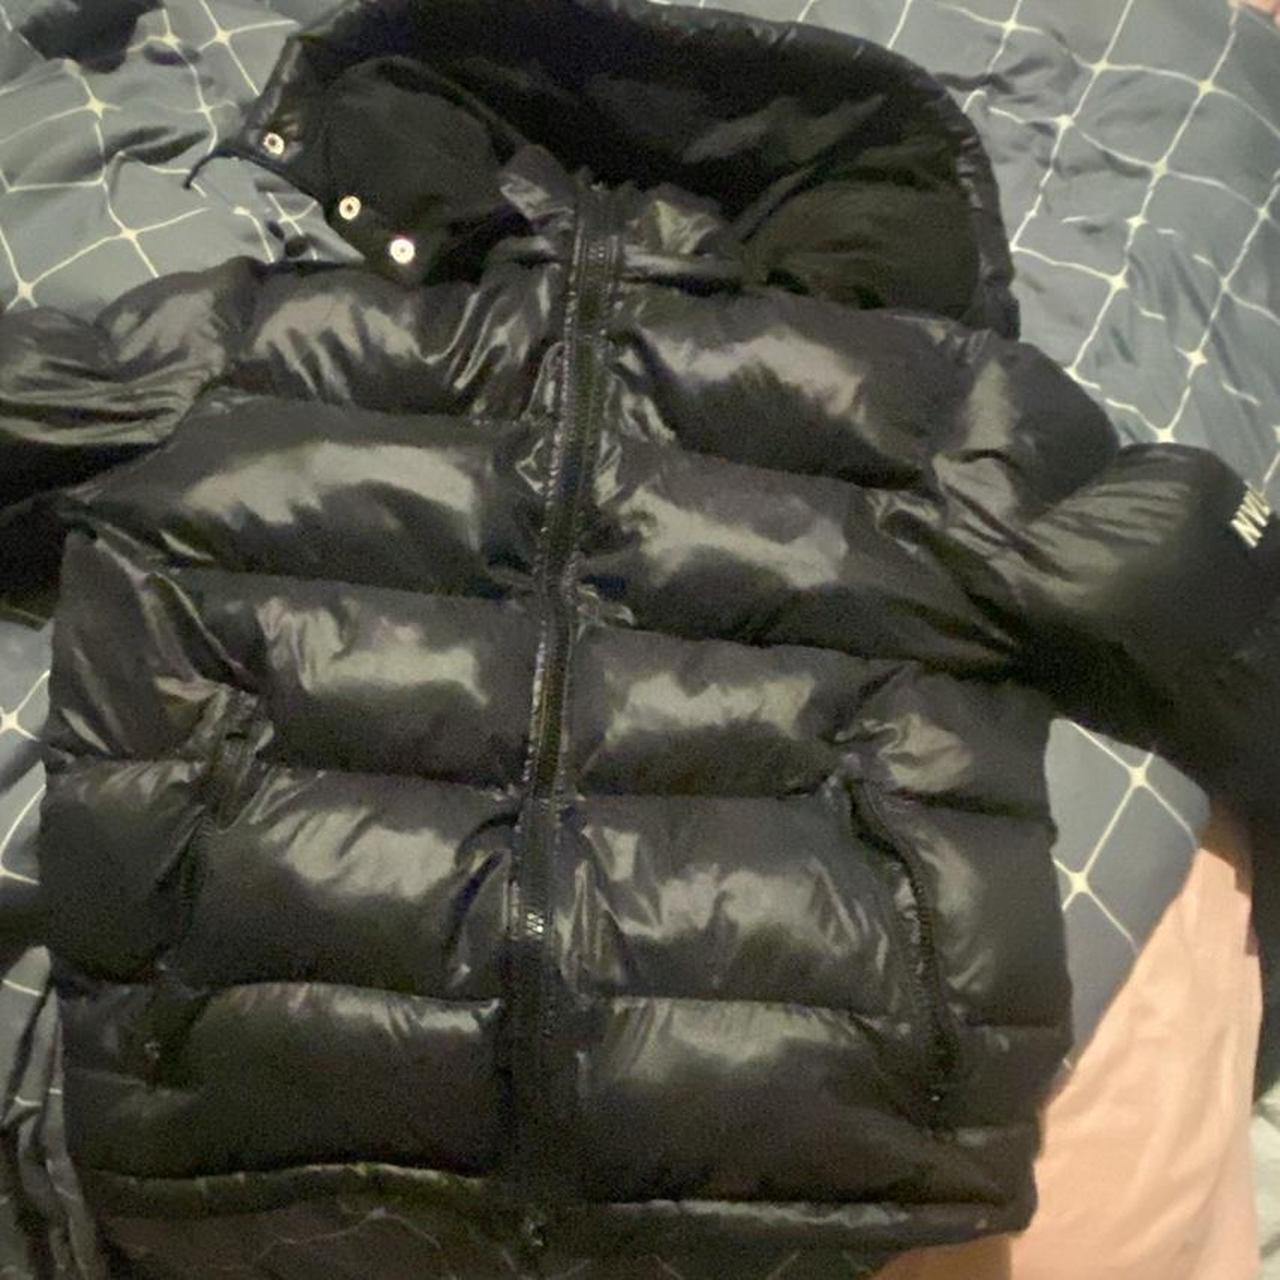 Nvlty puffer used a bit not any signs of wear - Depop